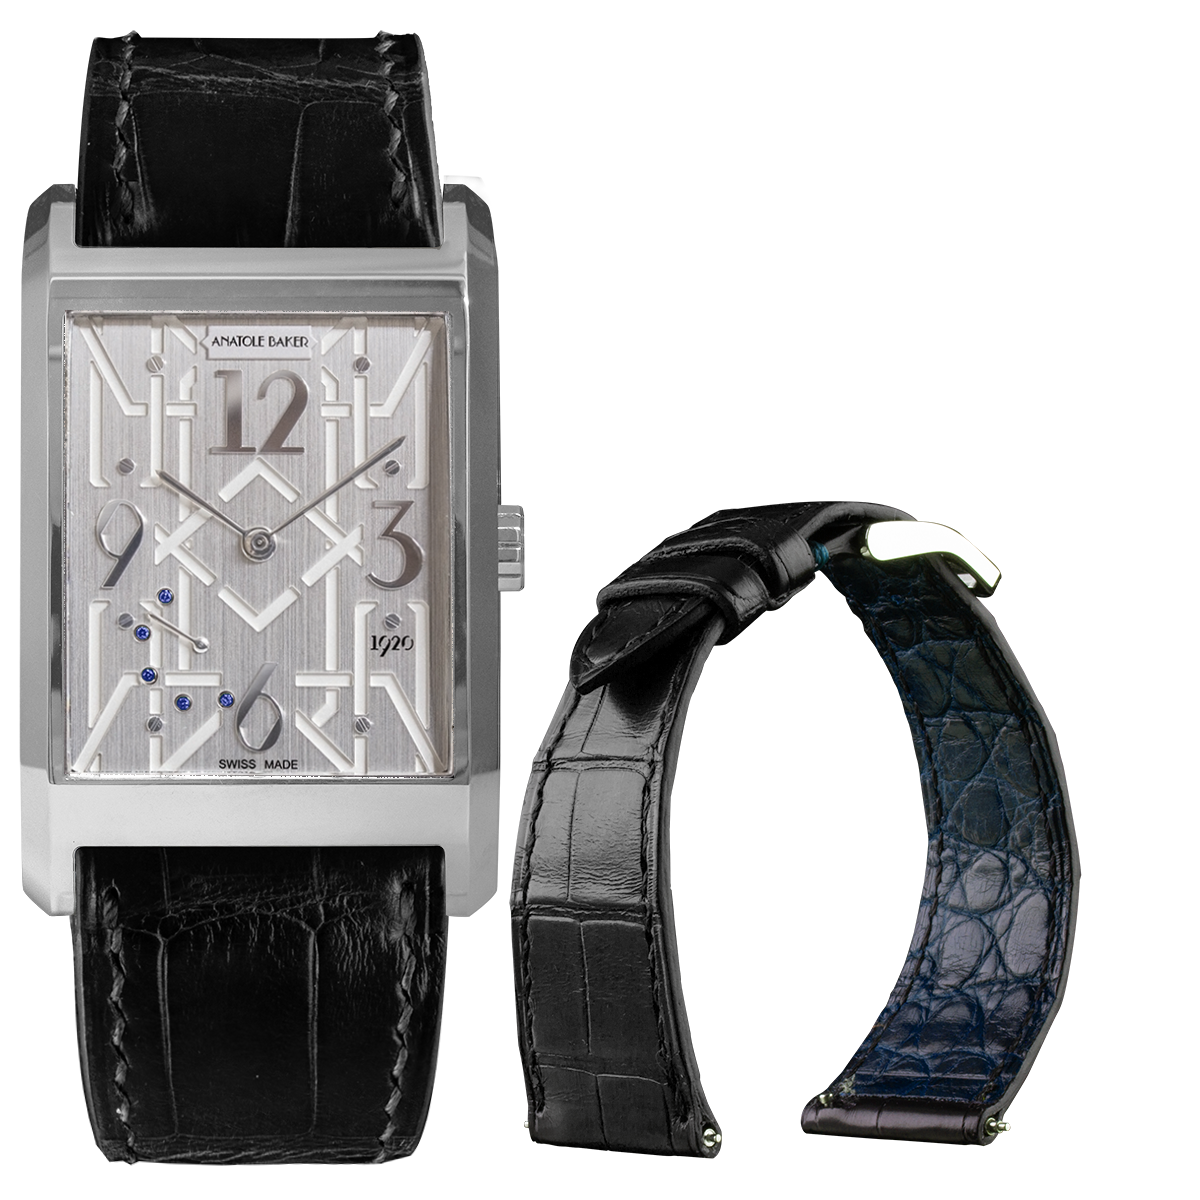 ANATOLE BAKER 1920 watch - Dandy blue sapphires - Black alligator strap with blue lining